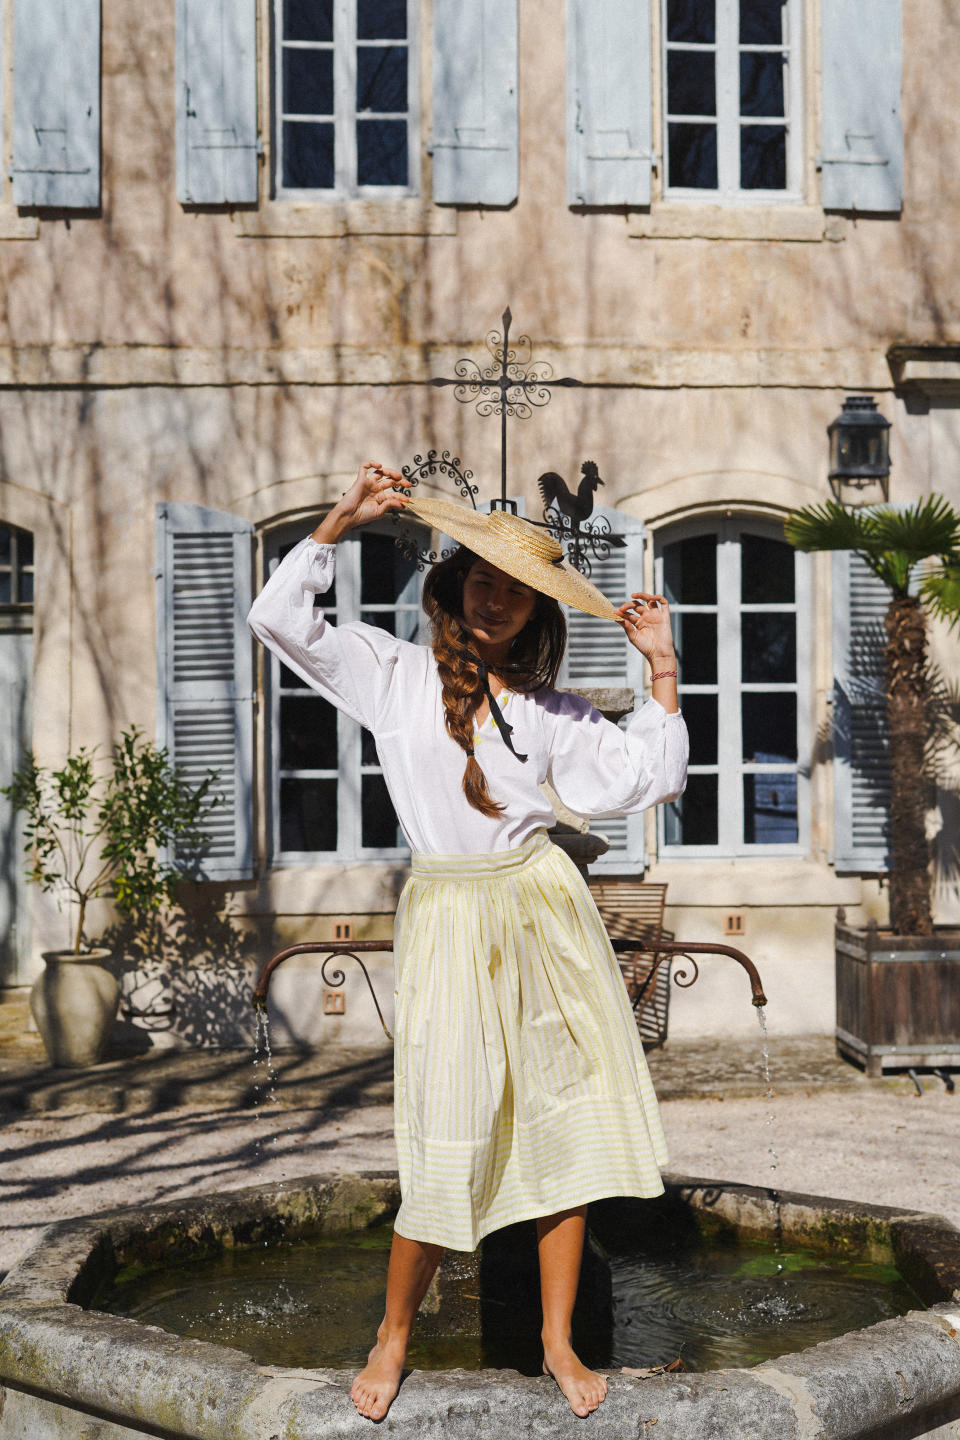 A ready-to-wear look by Le Château de Ma Mère. - Credit: Courtesy of Le Château from Ma Mère.